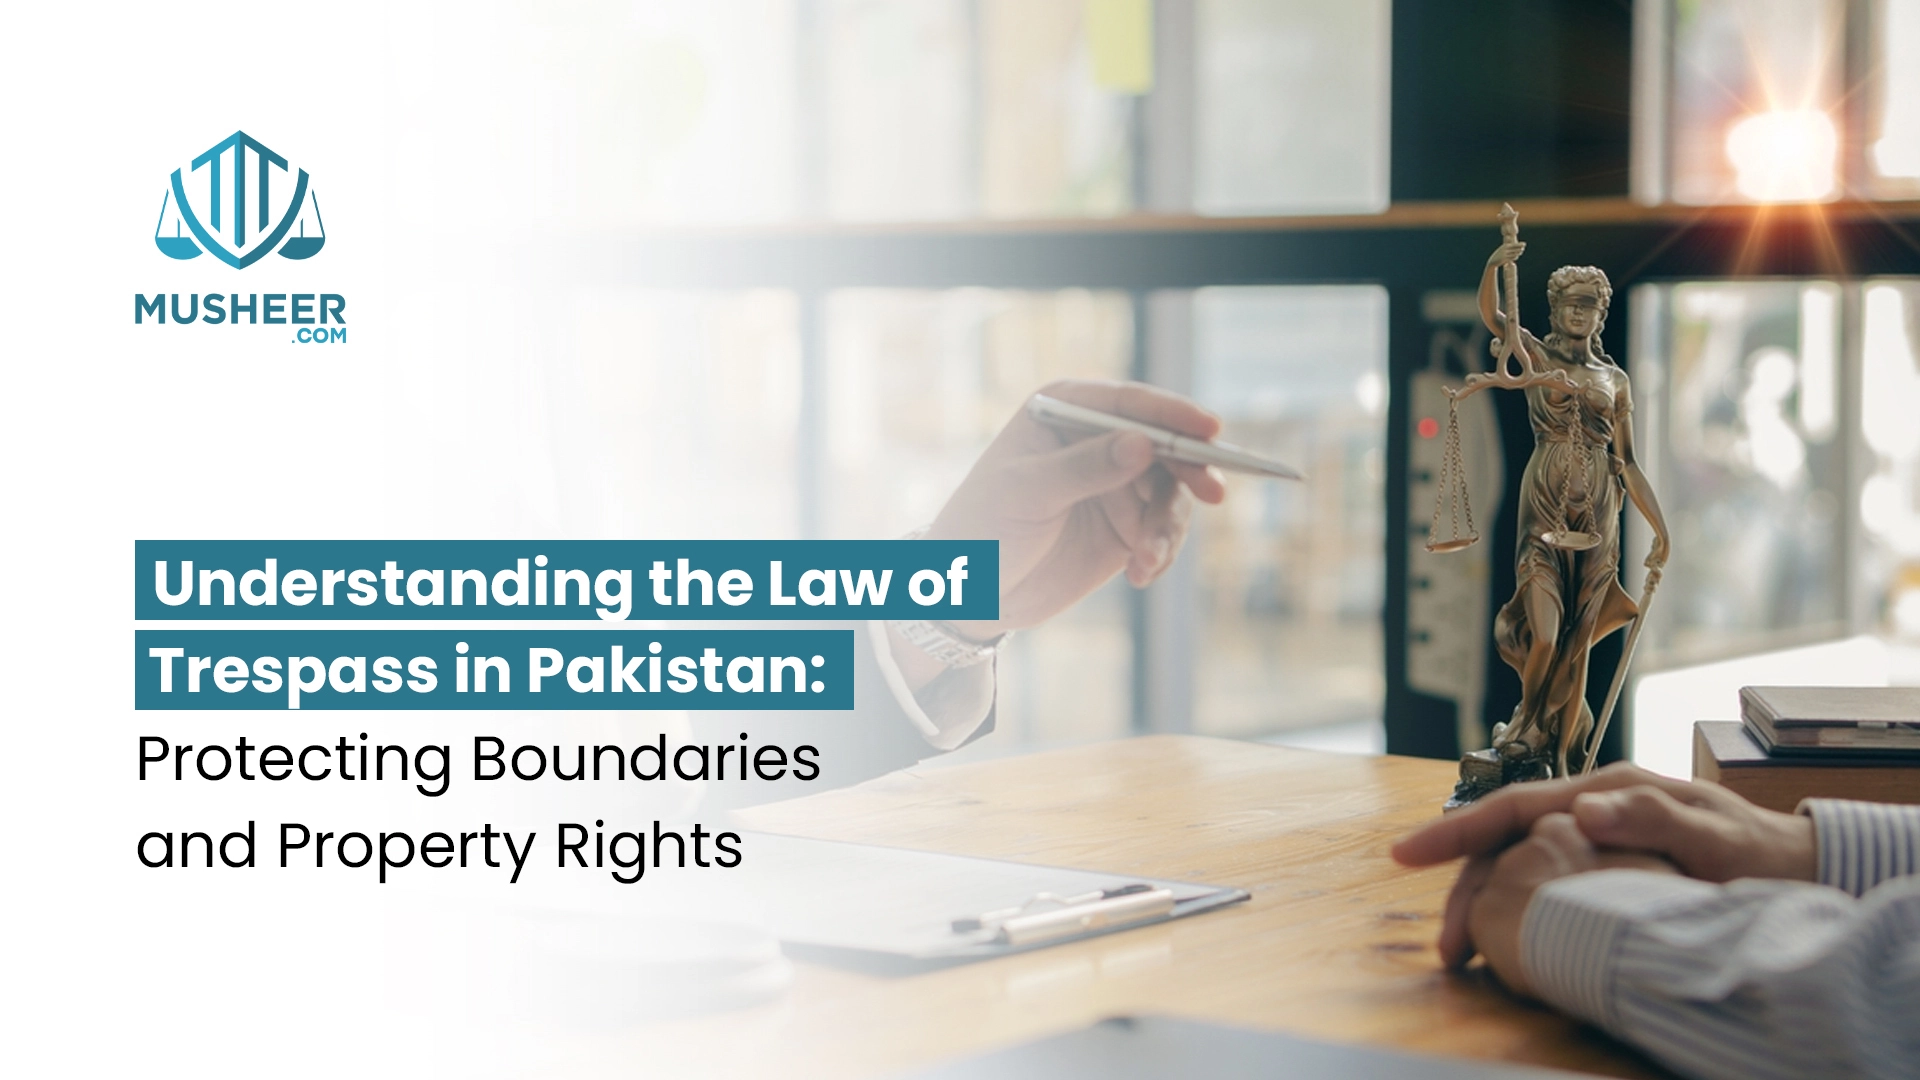 Understanding the Law of Trespass in Pakistan Protecting Boundaries and Property Rights